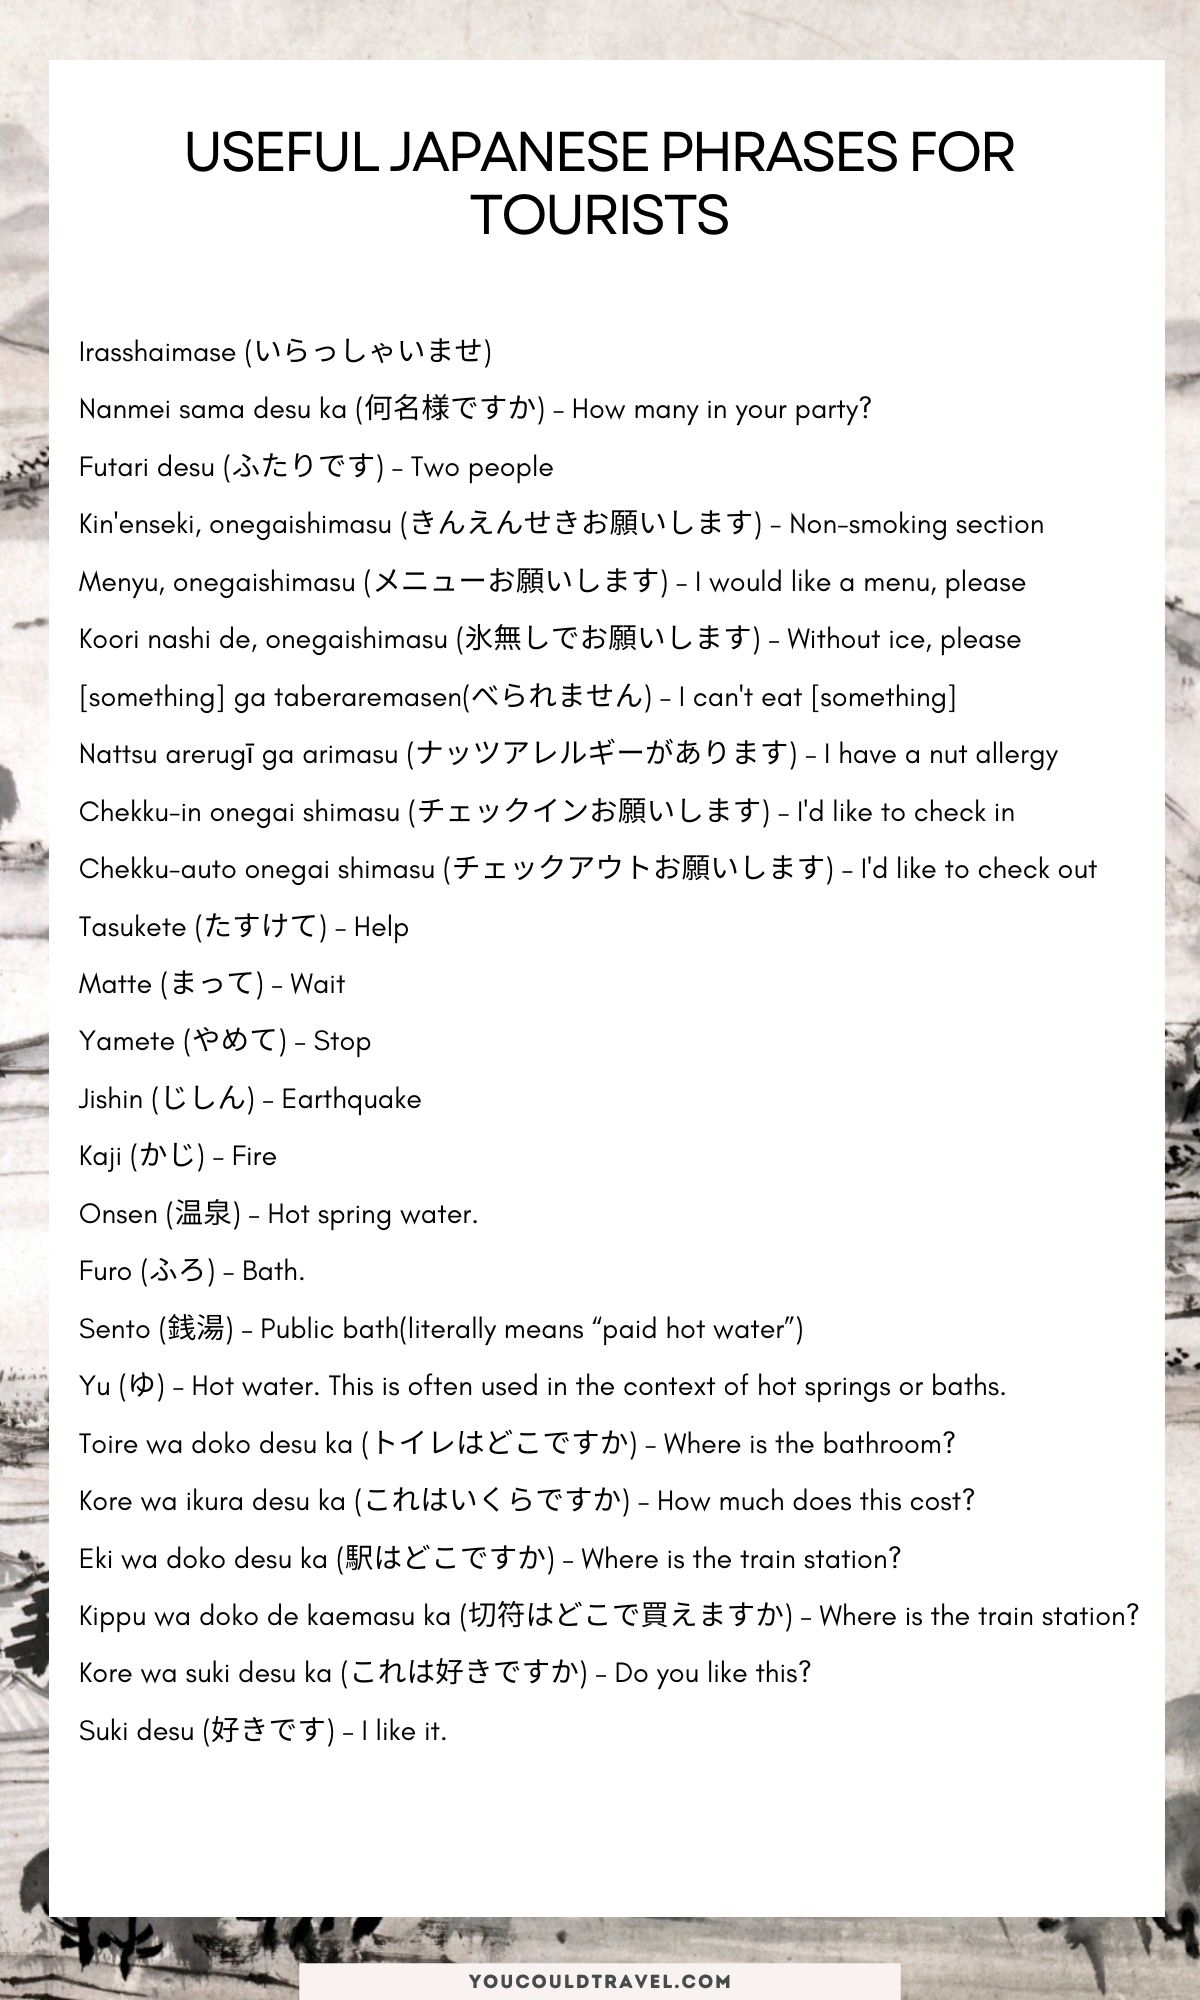 Useful Japanese phrases for tourists